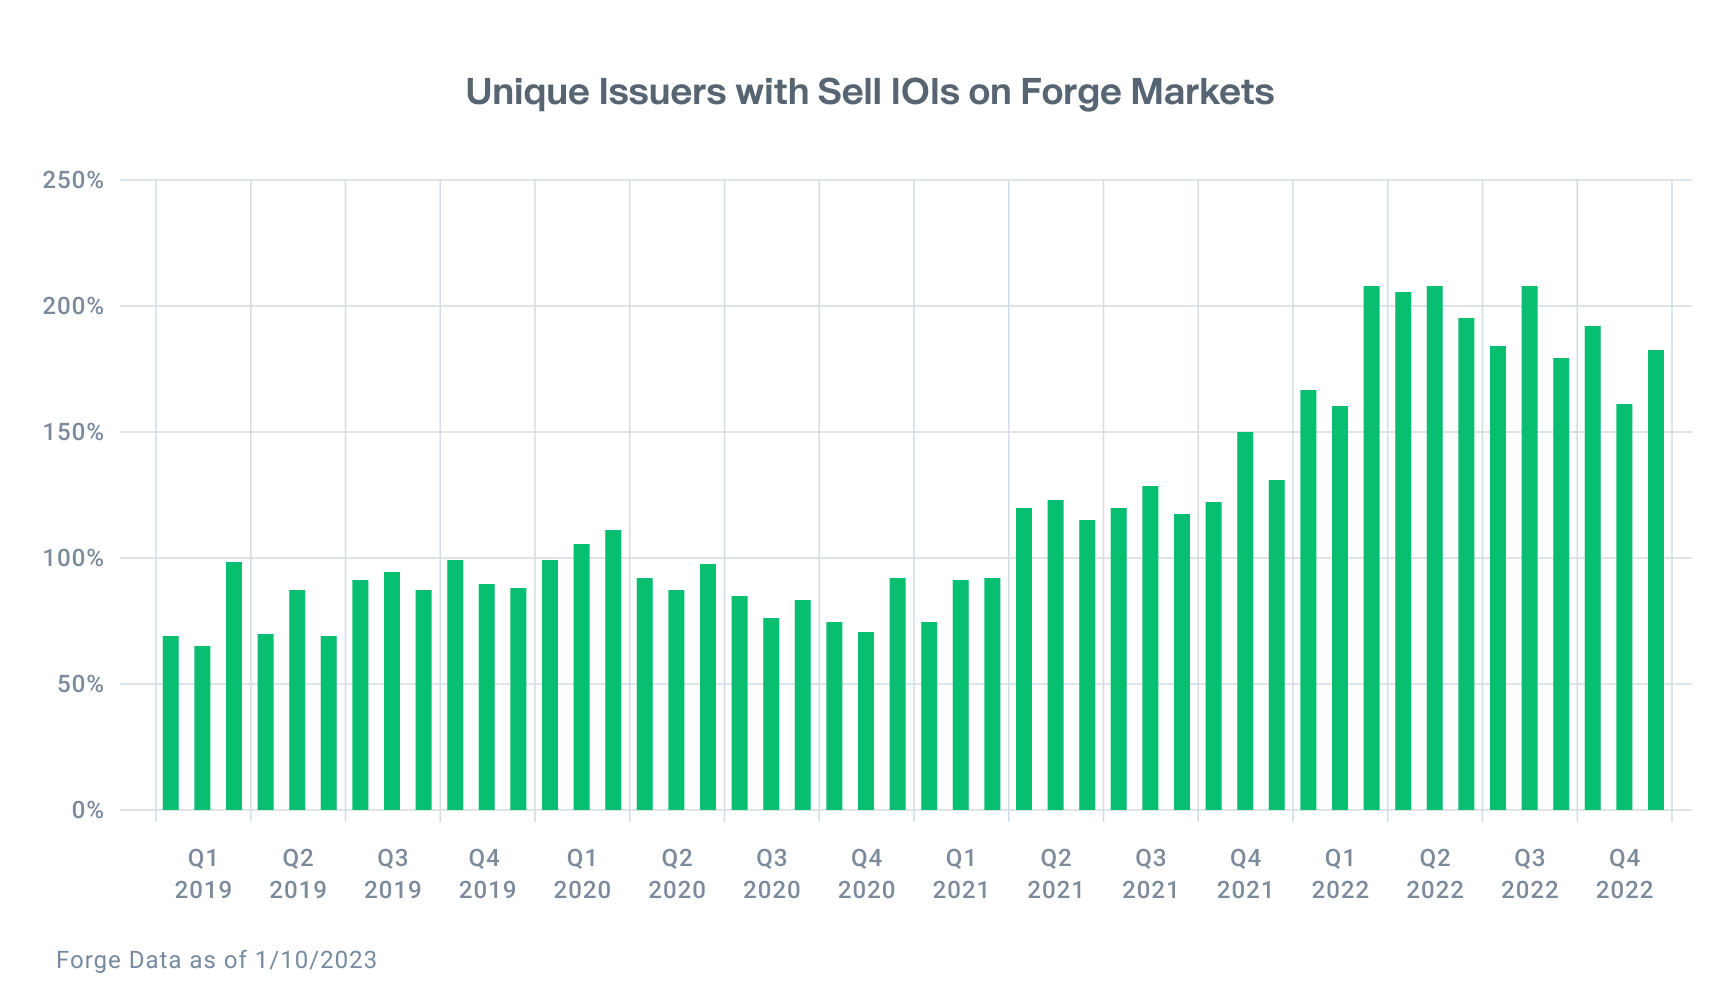 Bar chart shows no changes in trend for the number of unique issuers with Sell IOIs on Forge Markets